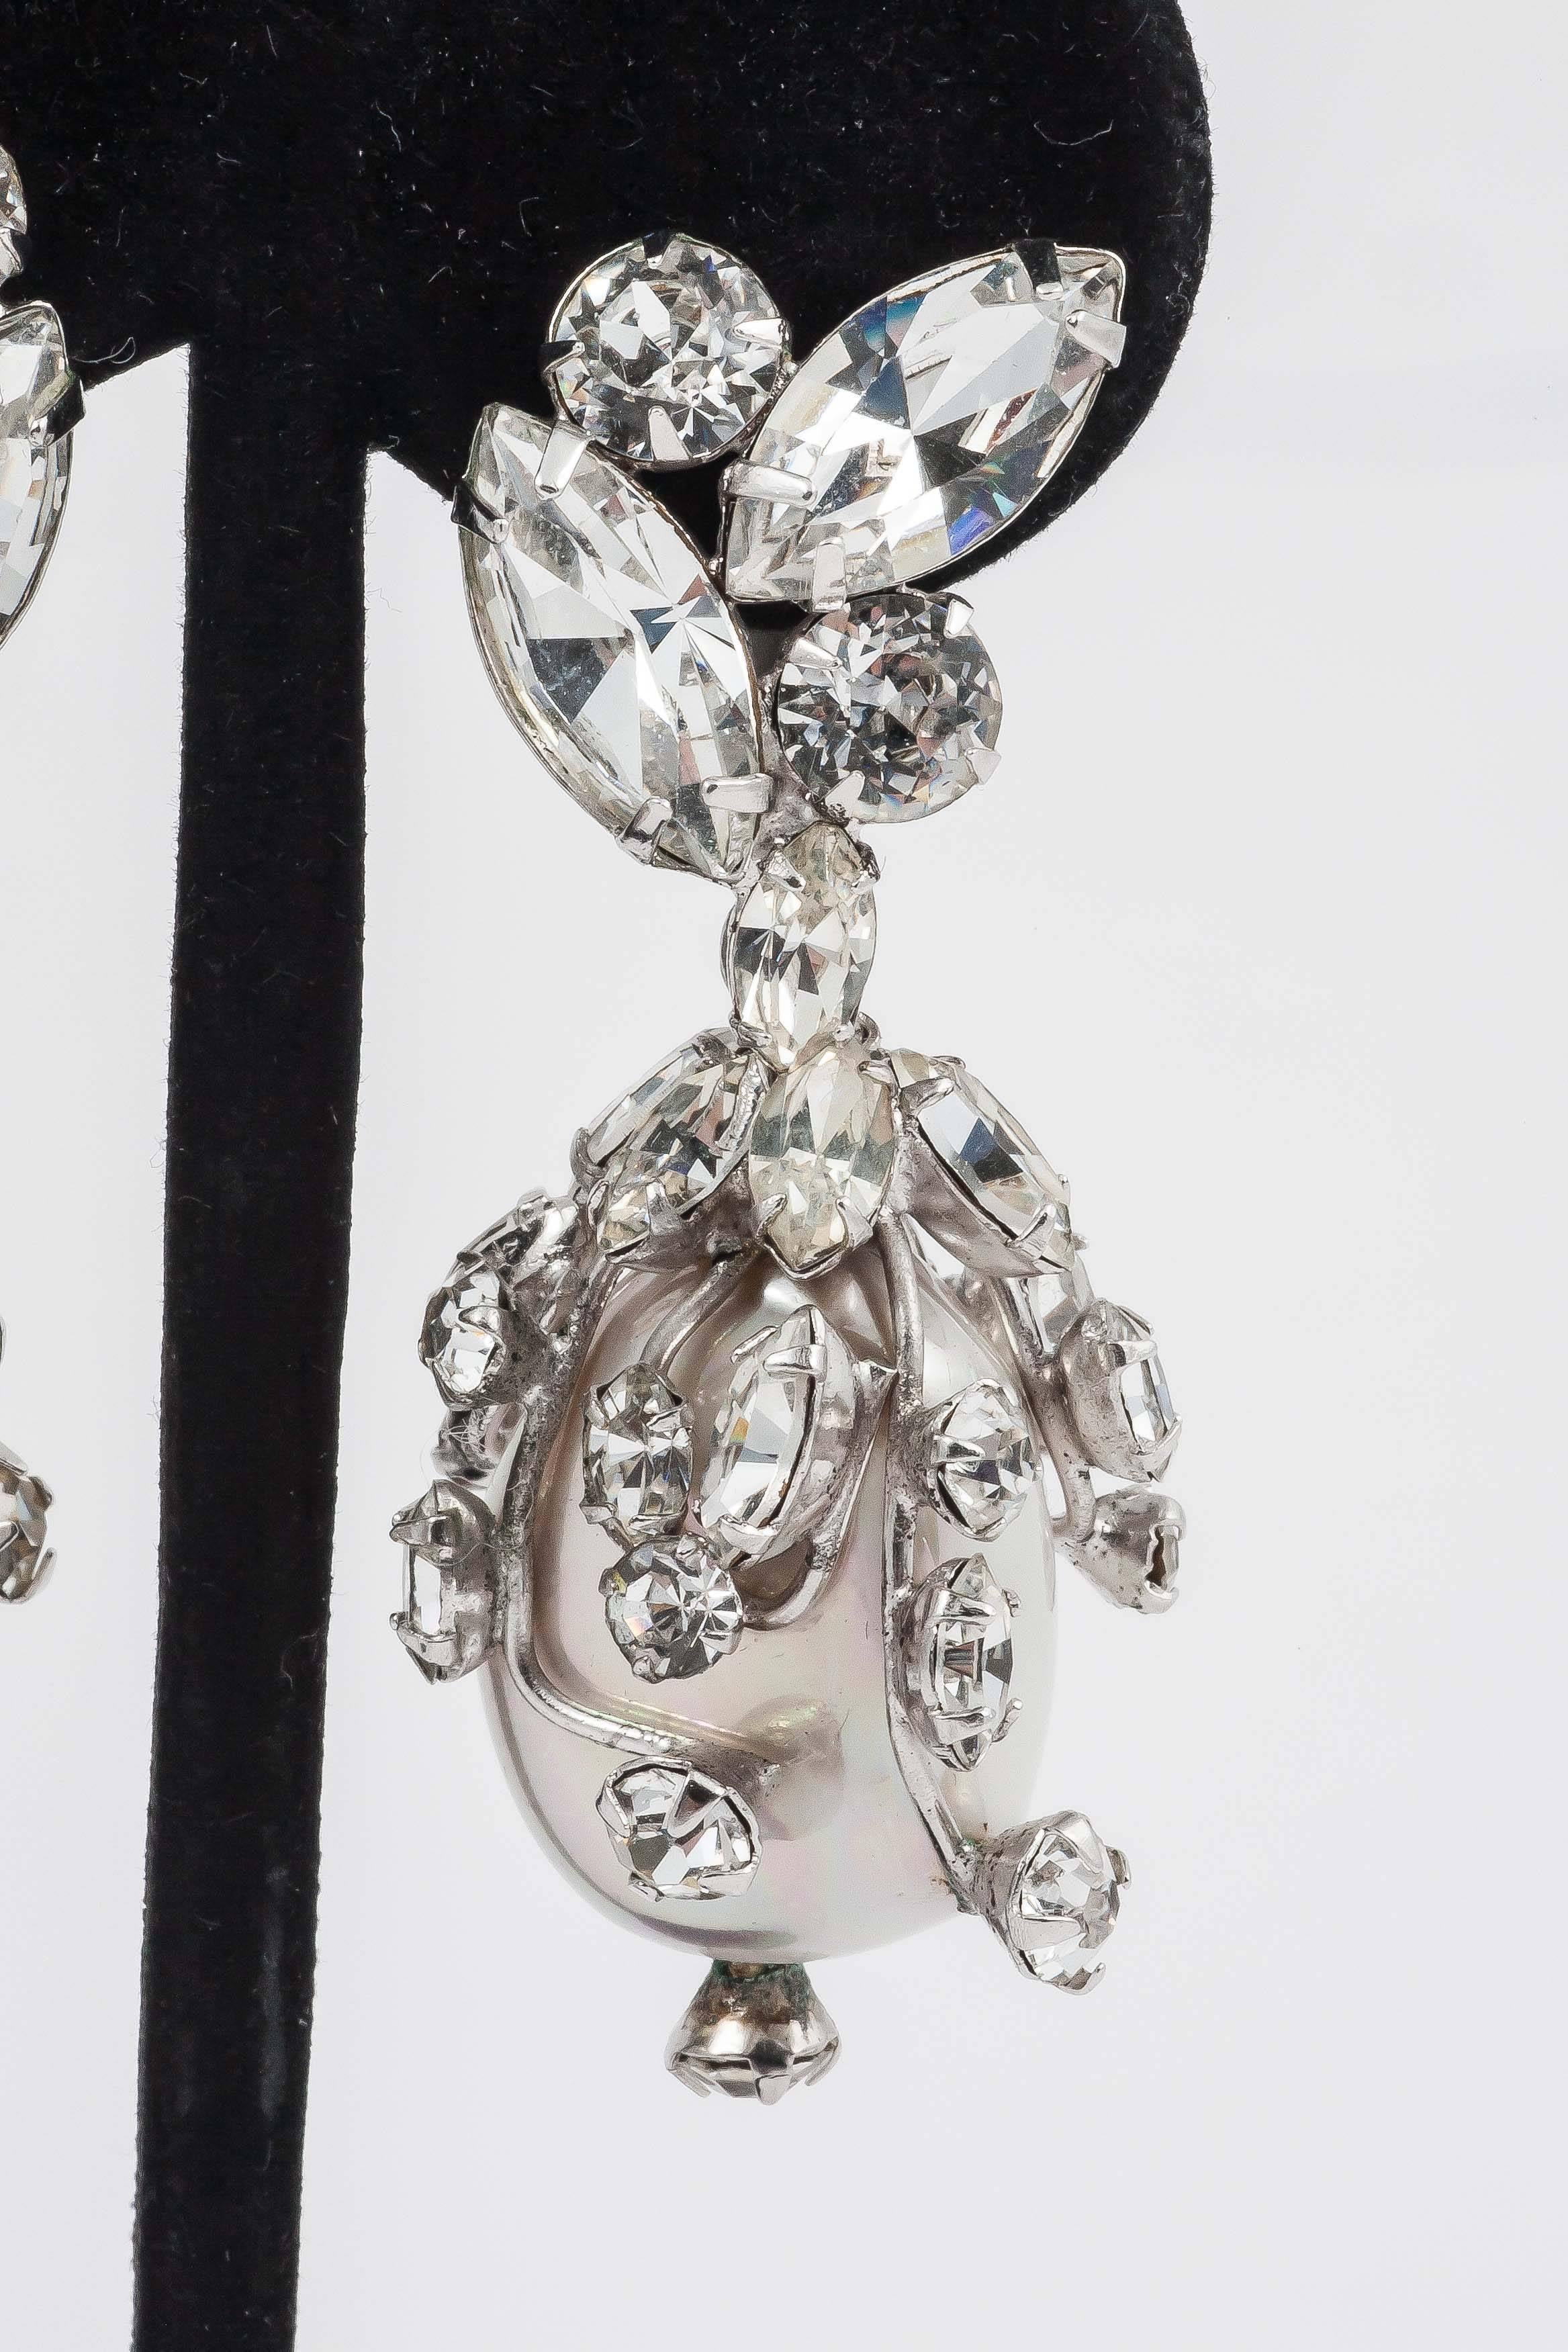 Highly sculptural Schreiner earrings perfect for a formal wedding or red carpet event. Schreiner has taken a faux mabe pearl and enrobed it in rhodium plated tendrils all ending in different shapes of clear paste, even the end piece has a paste